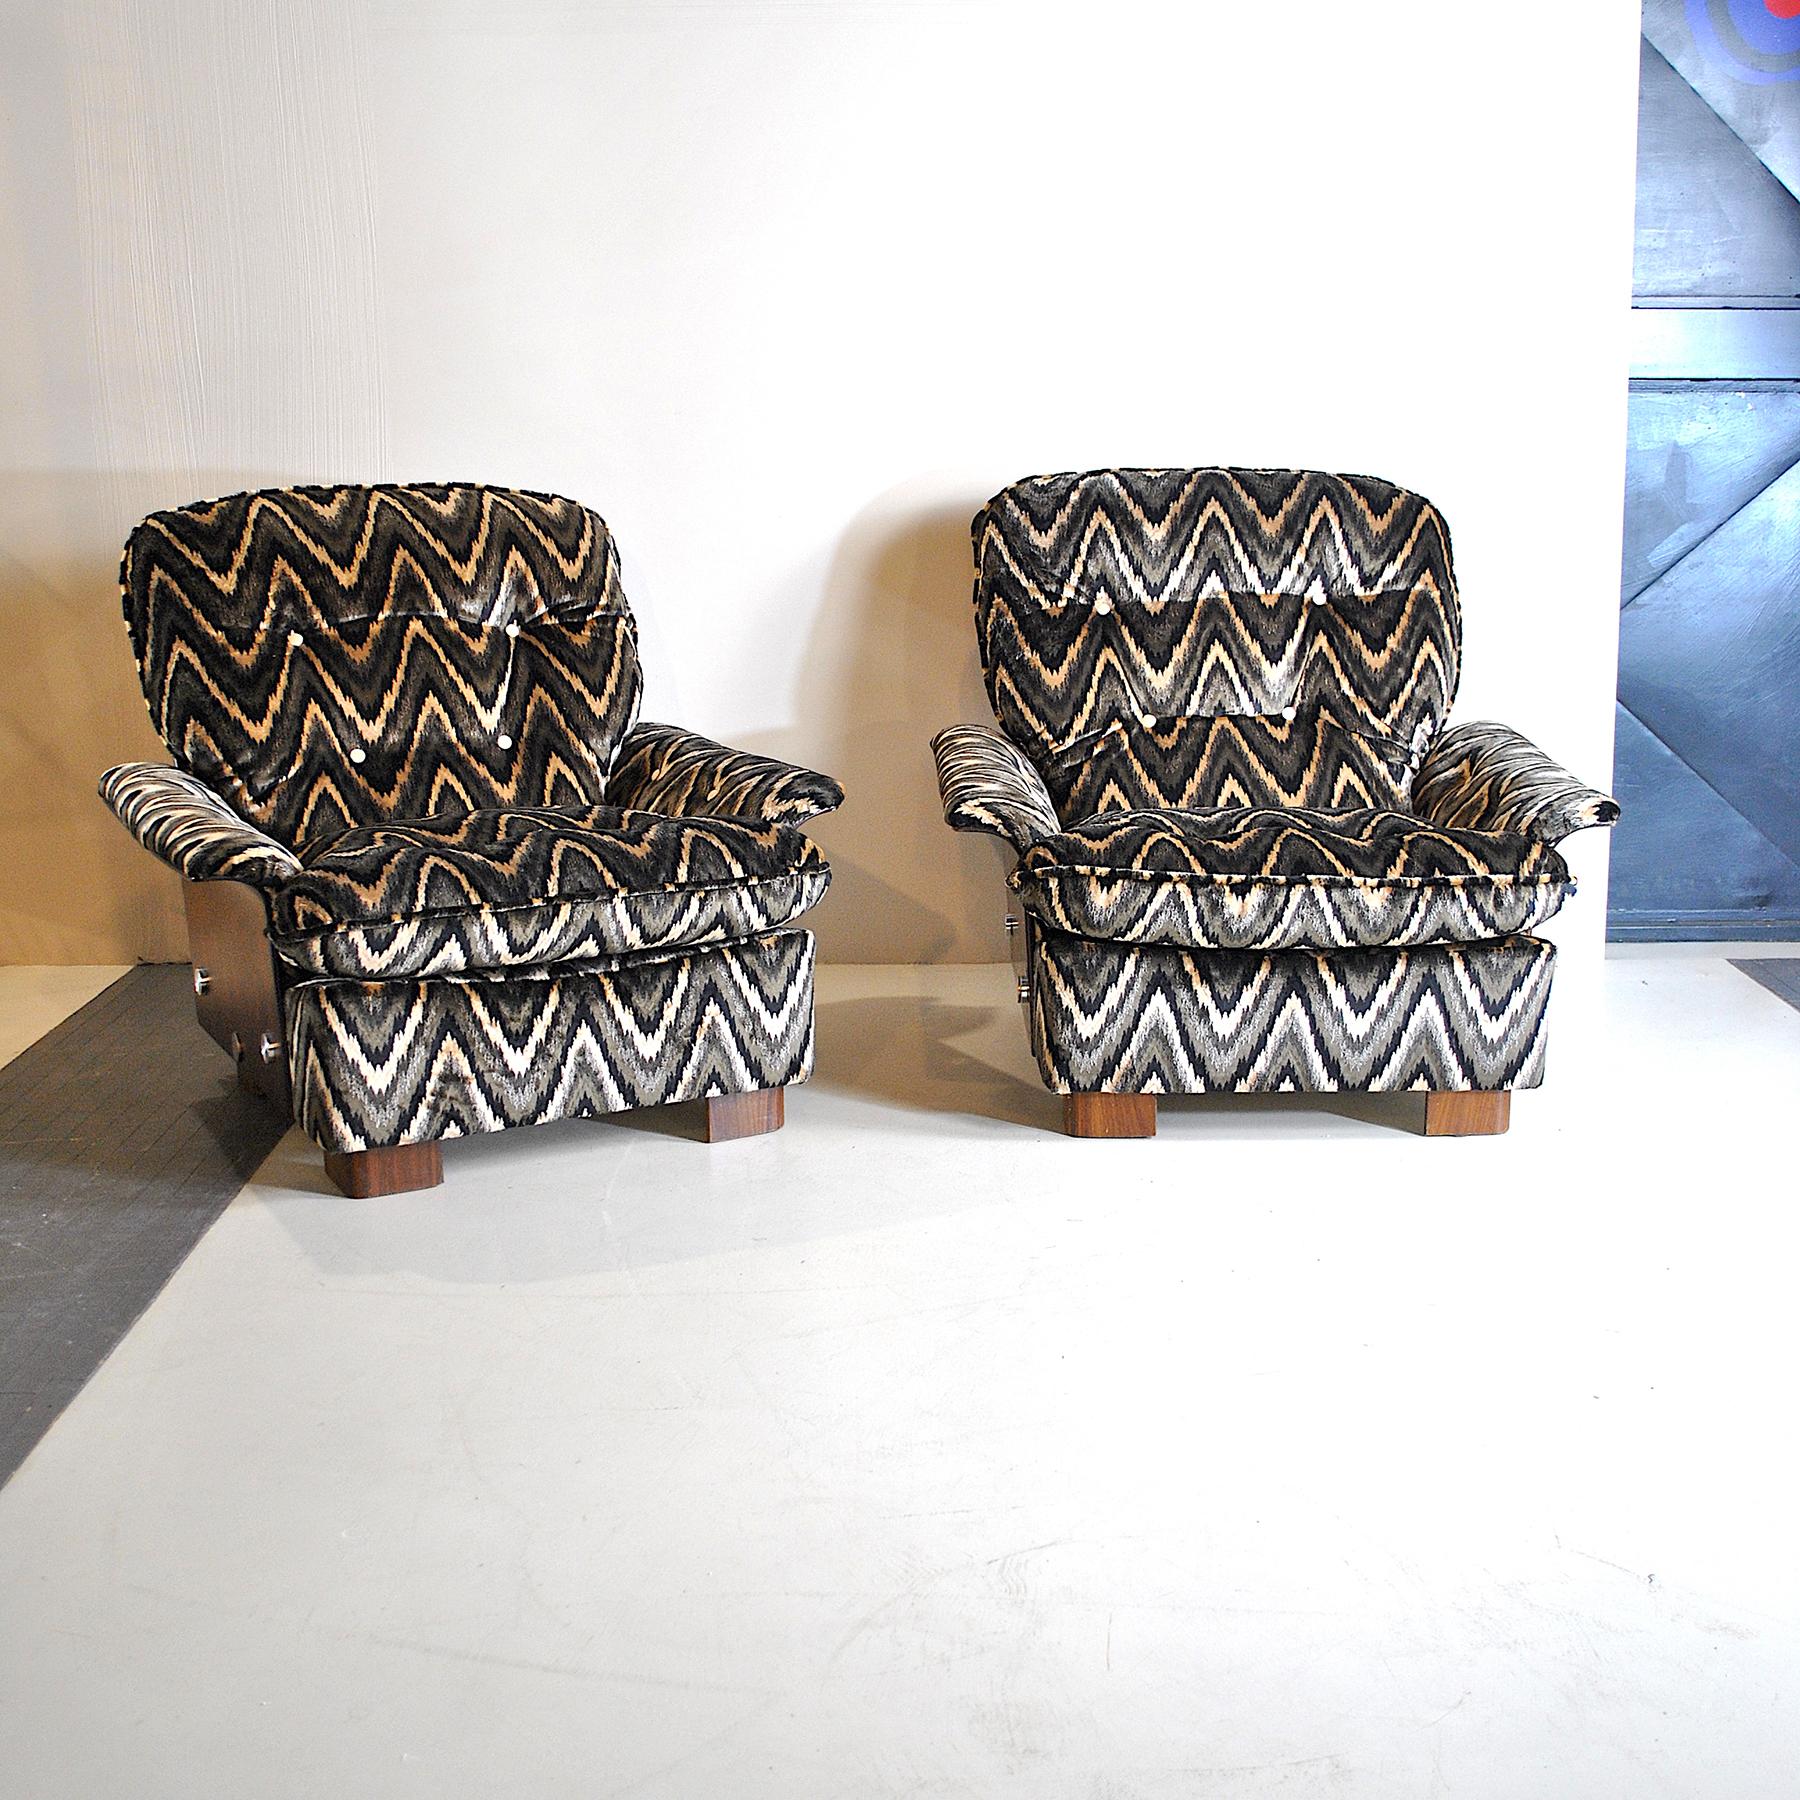 Pair of Italian armchair in curved wood with original Missoni fabric from the 1970s.